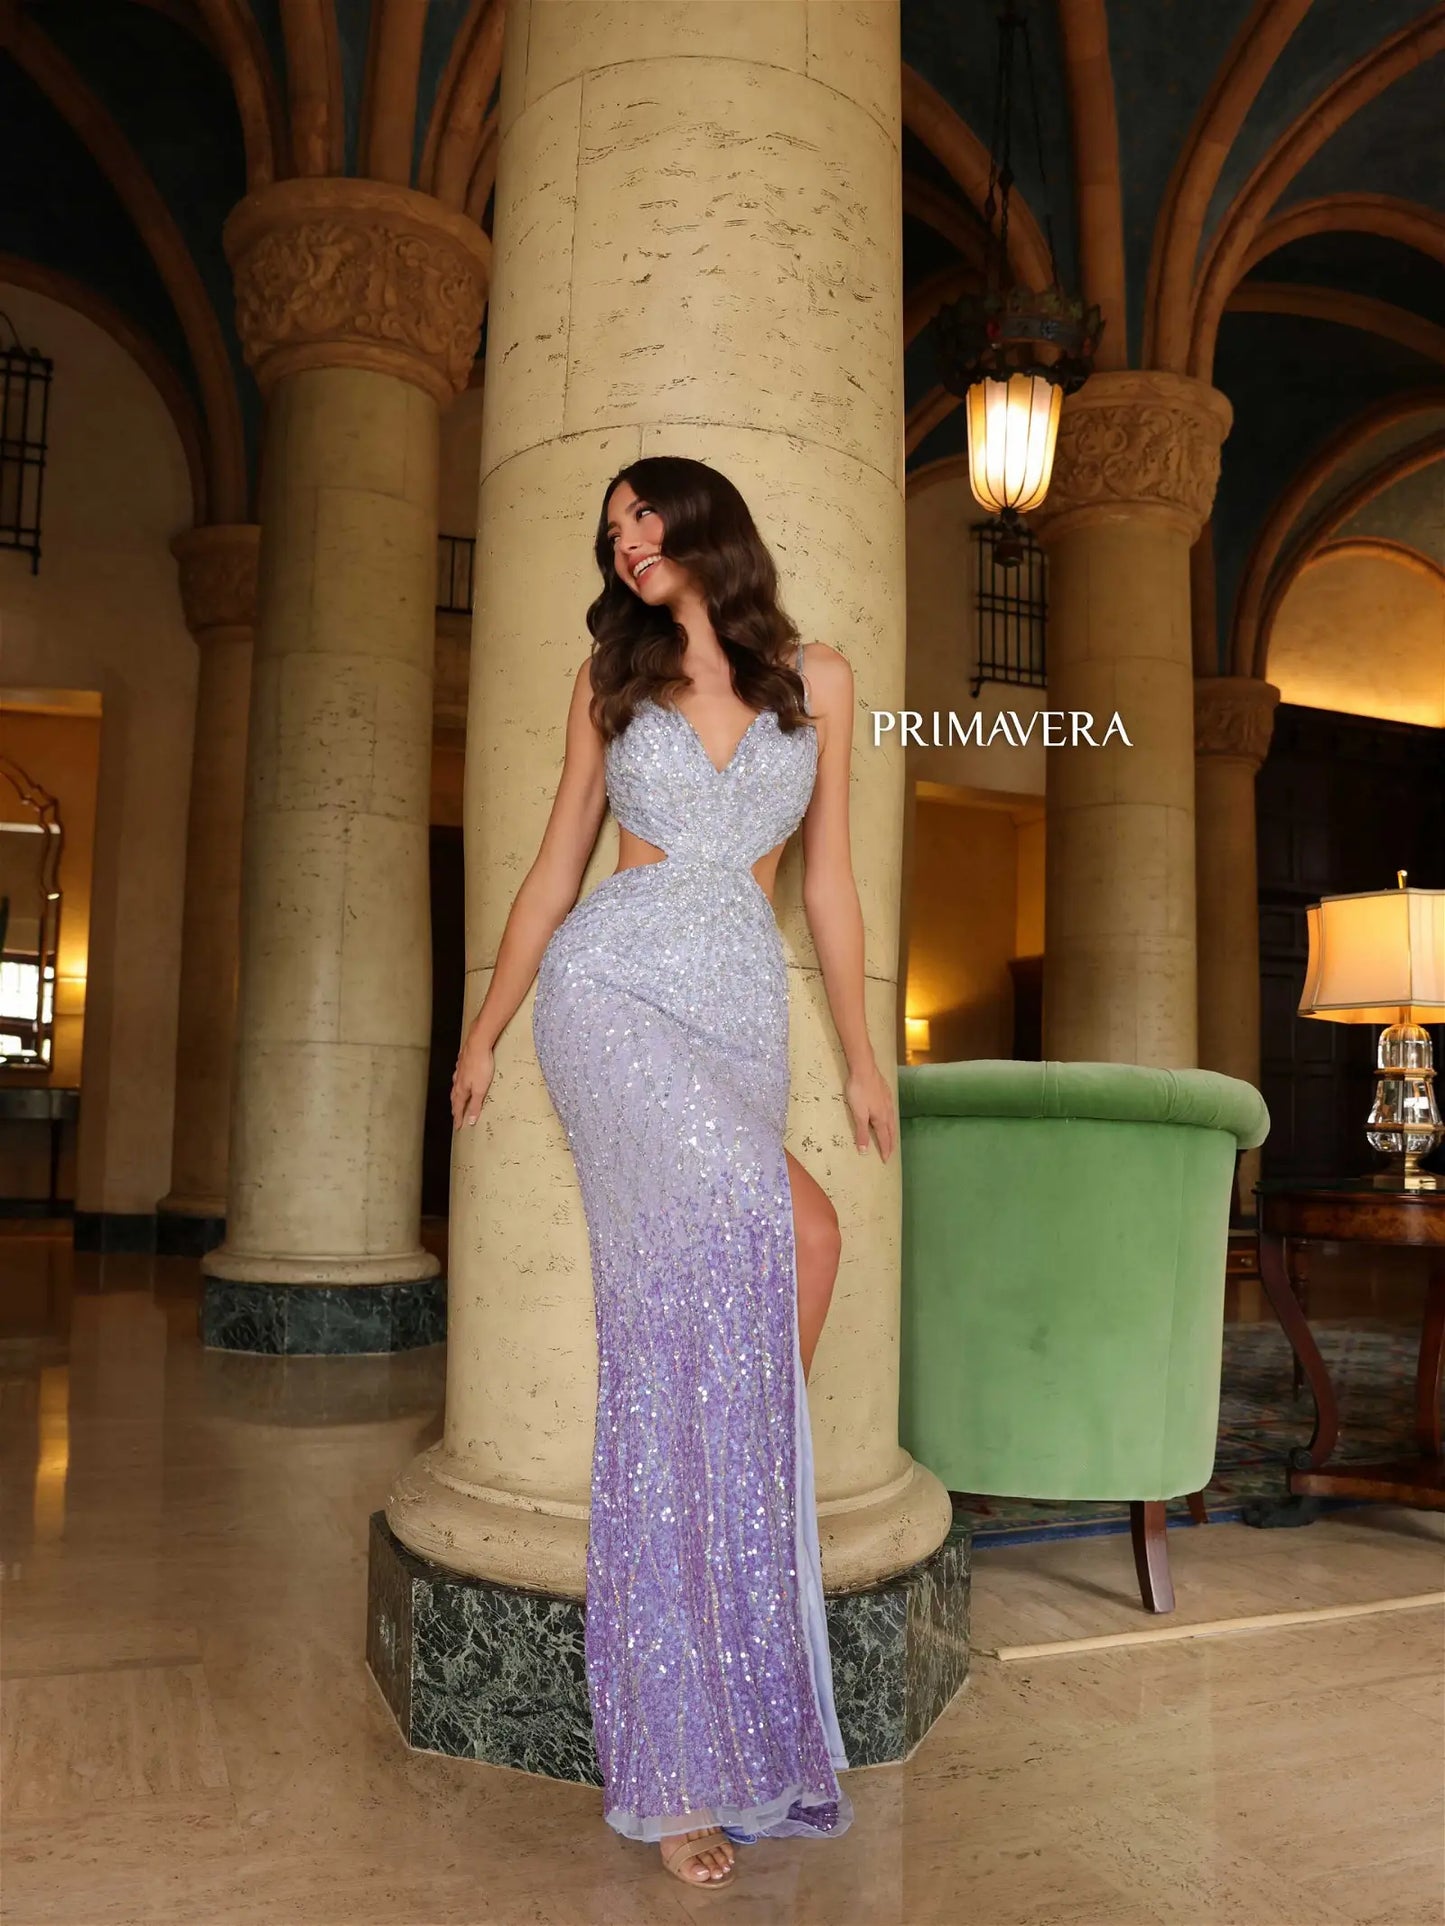 This Primavera Couture 4136 prom dress offers a stunning look with its cutout corset bodice, backless design, and ombre beaded skirt. Intricately sequined and with a daring thigh-high slit, this gown is sure to turn heads. Ideal for any special occasion.  Sizes: 000-18  Colors: Pink, Lilac, Black